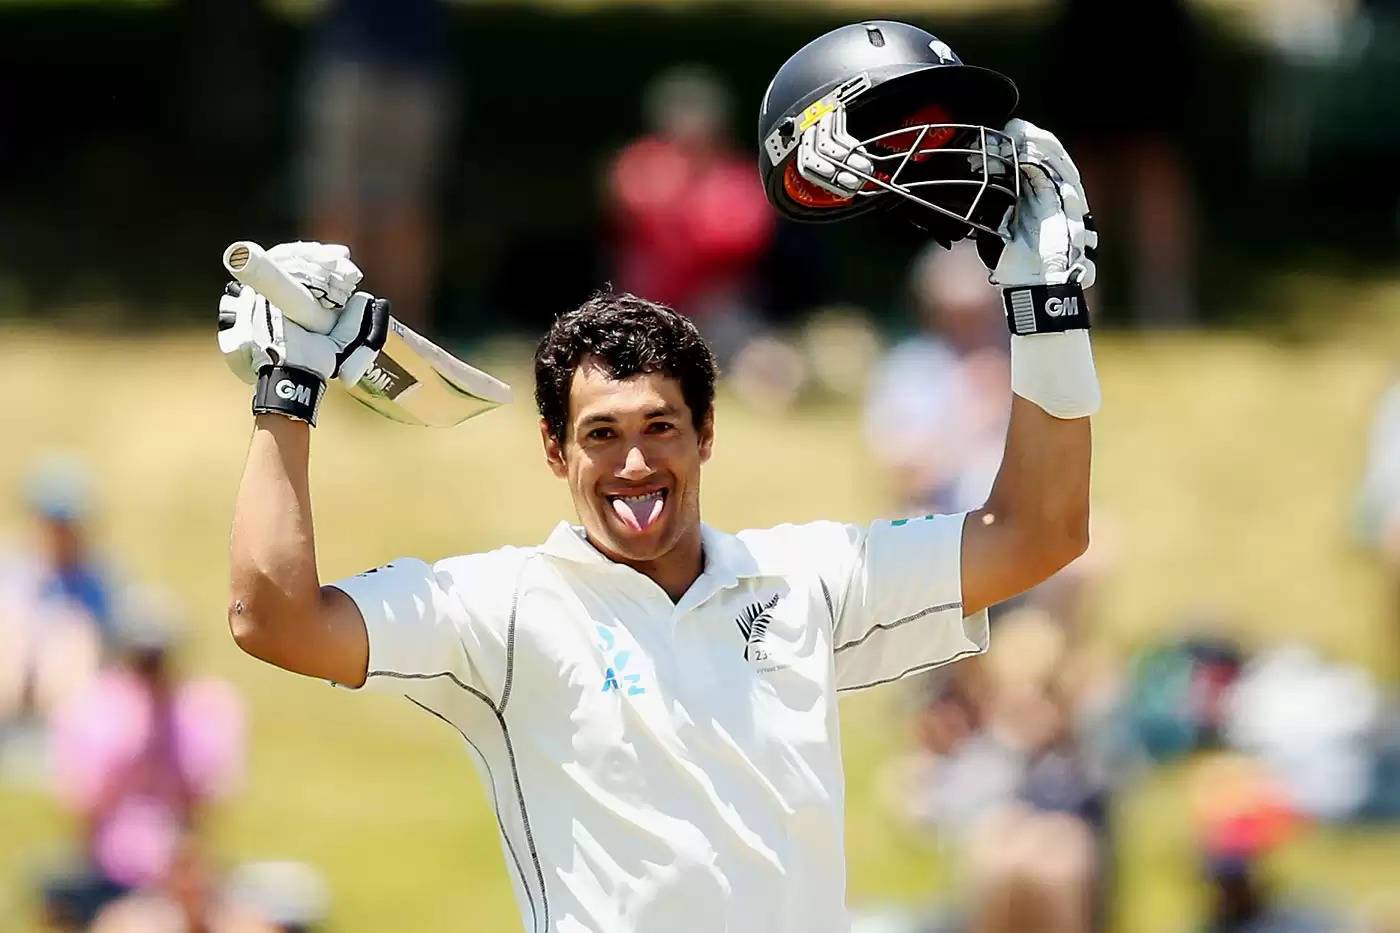 Ross Taylor on 100 Tests: No one has perfect career, you make mistakes and grow